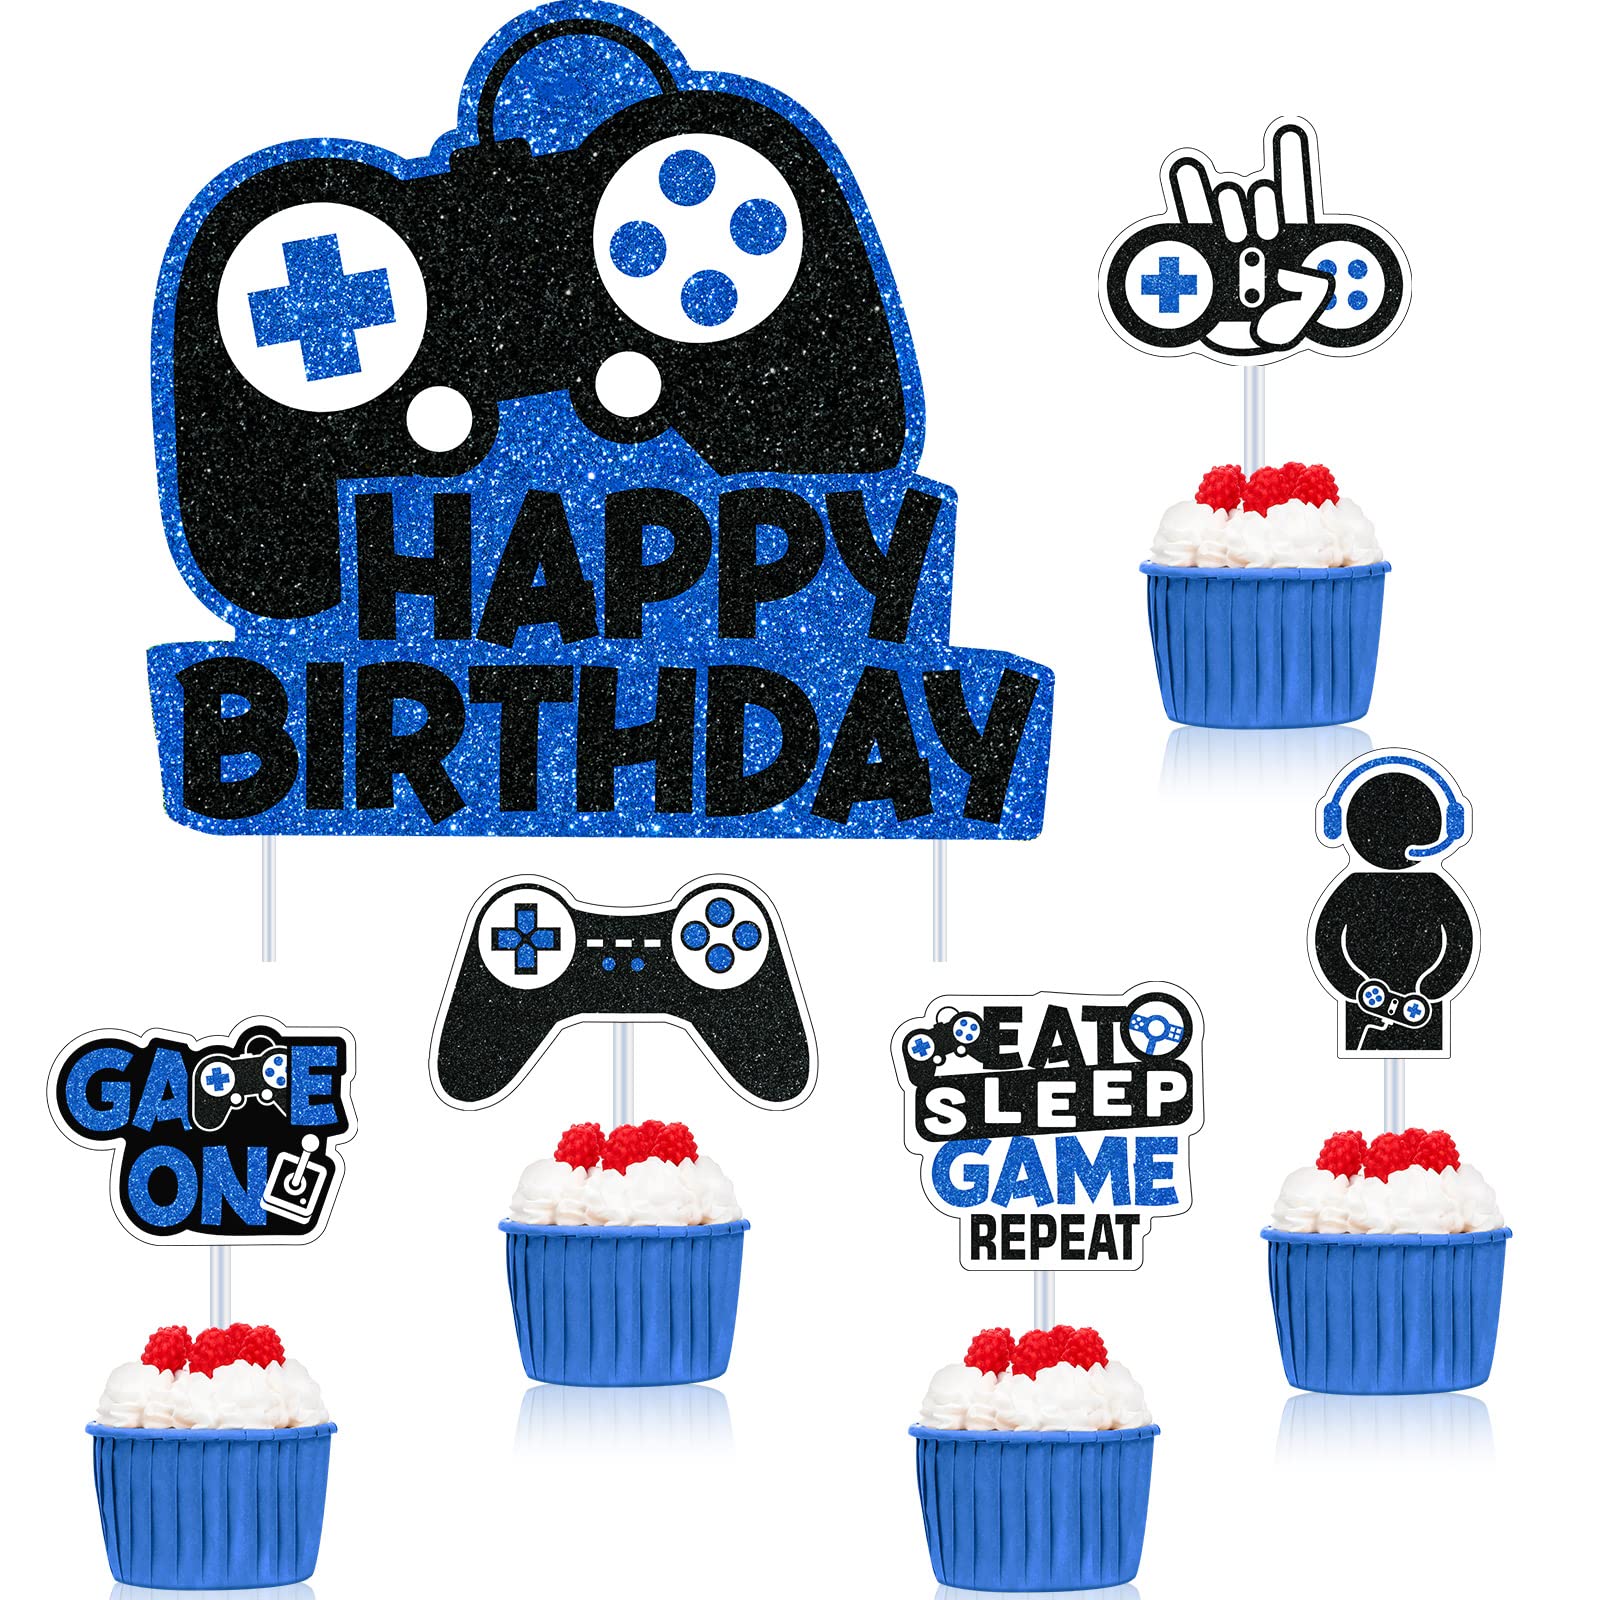 Amazon.com: Video Game Cake Toppers, Video Game Happy Birthday Cake  Decorations Boys with Green Black Gaming Theme Cupcake Topper Picks Birthday  Decorations for Boys Kids Gaming Birthday Party Favors Supplies : Toys